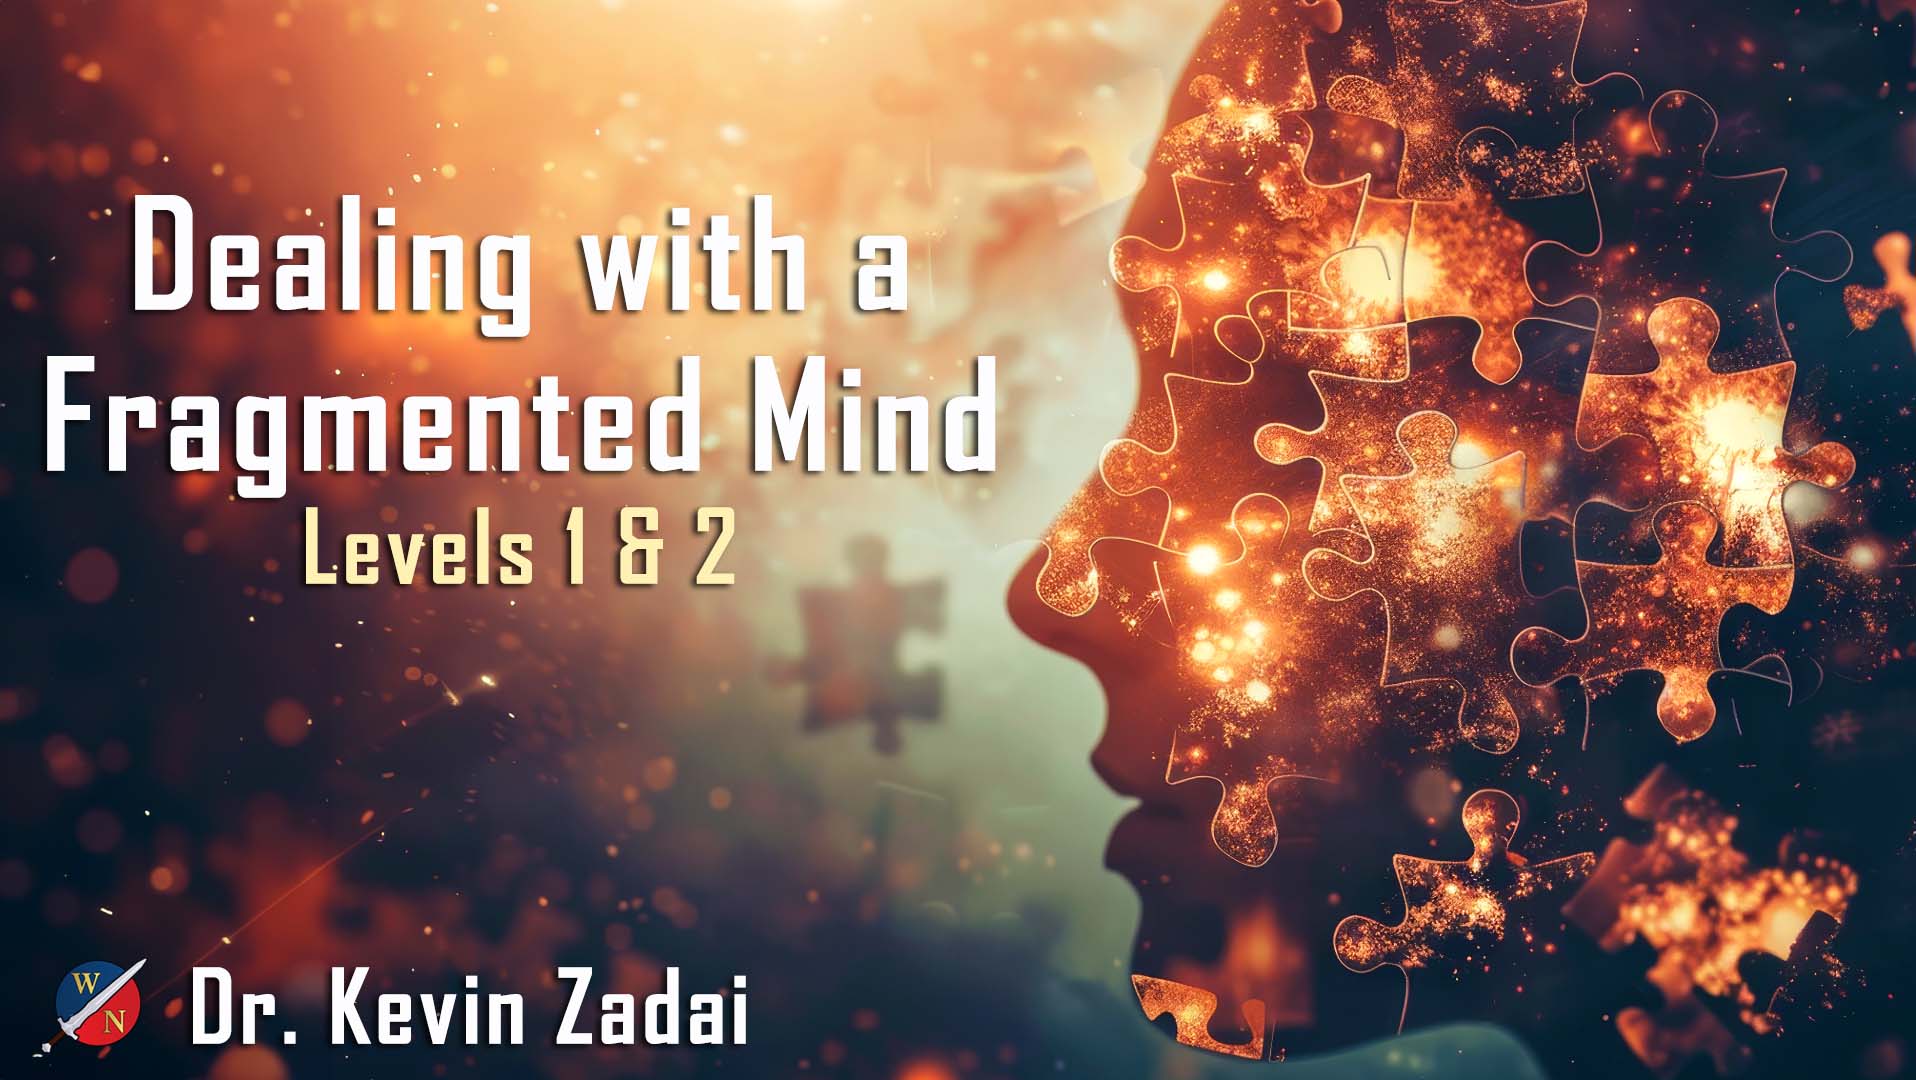 Dealing with a Fragmented Mind by Dr. Kevin Zadai - Course Image